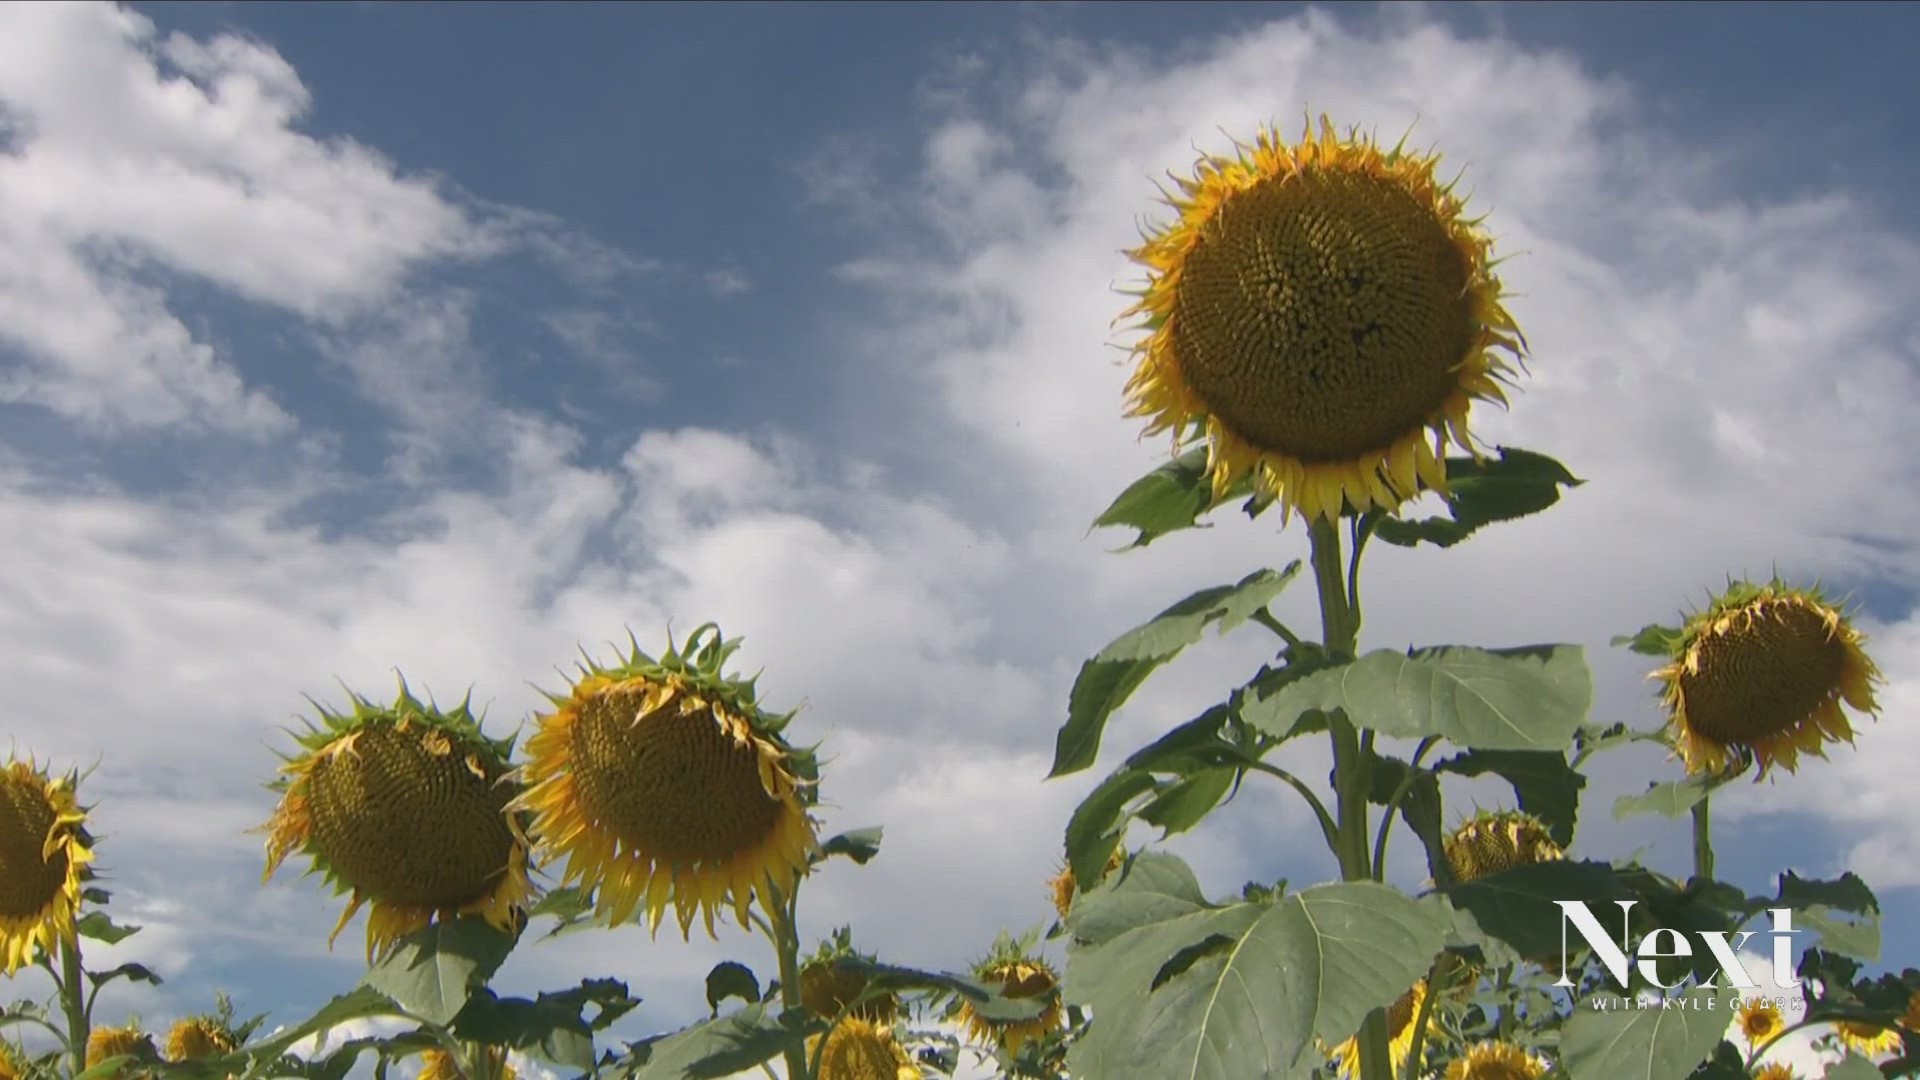 Trespassing and damage from people taking photos of sunflowers got so bad in Adams County that they grew a public patch where you can film your TikToks.